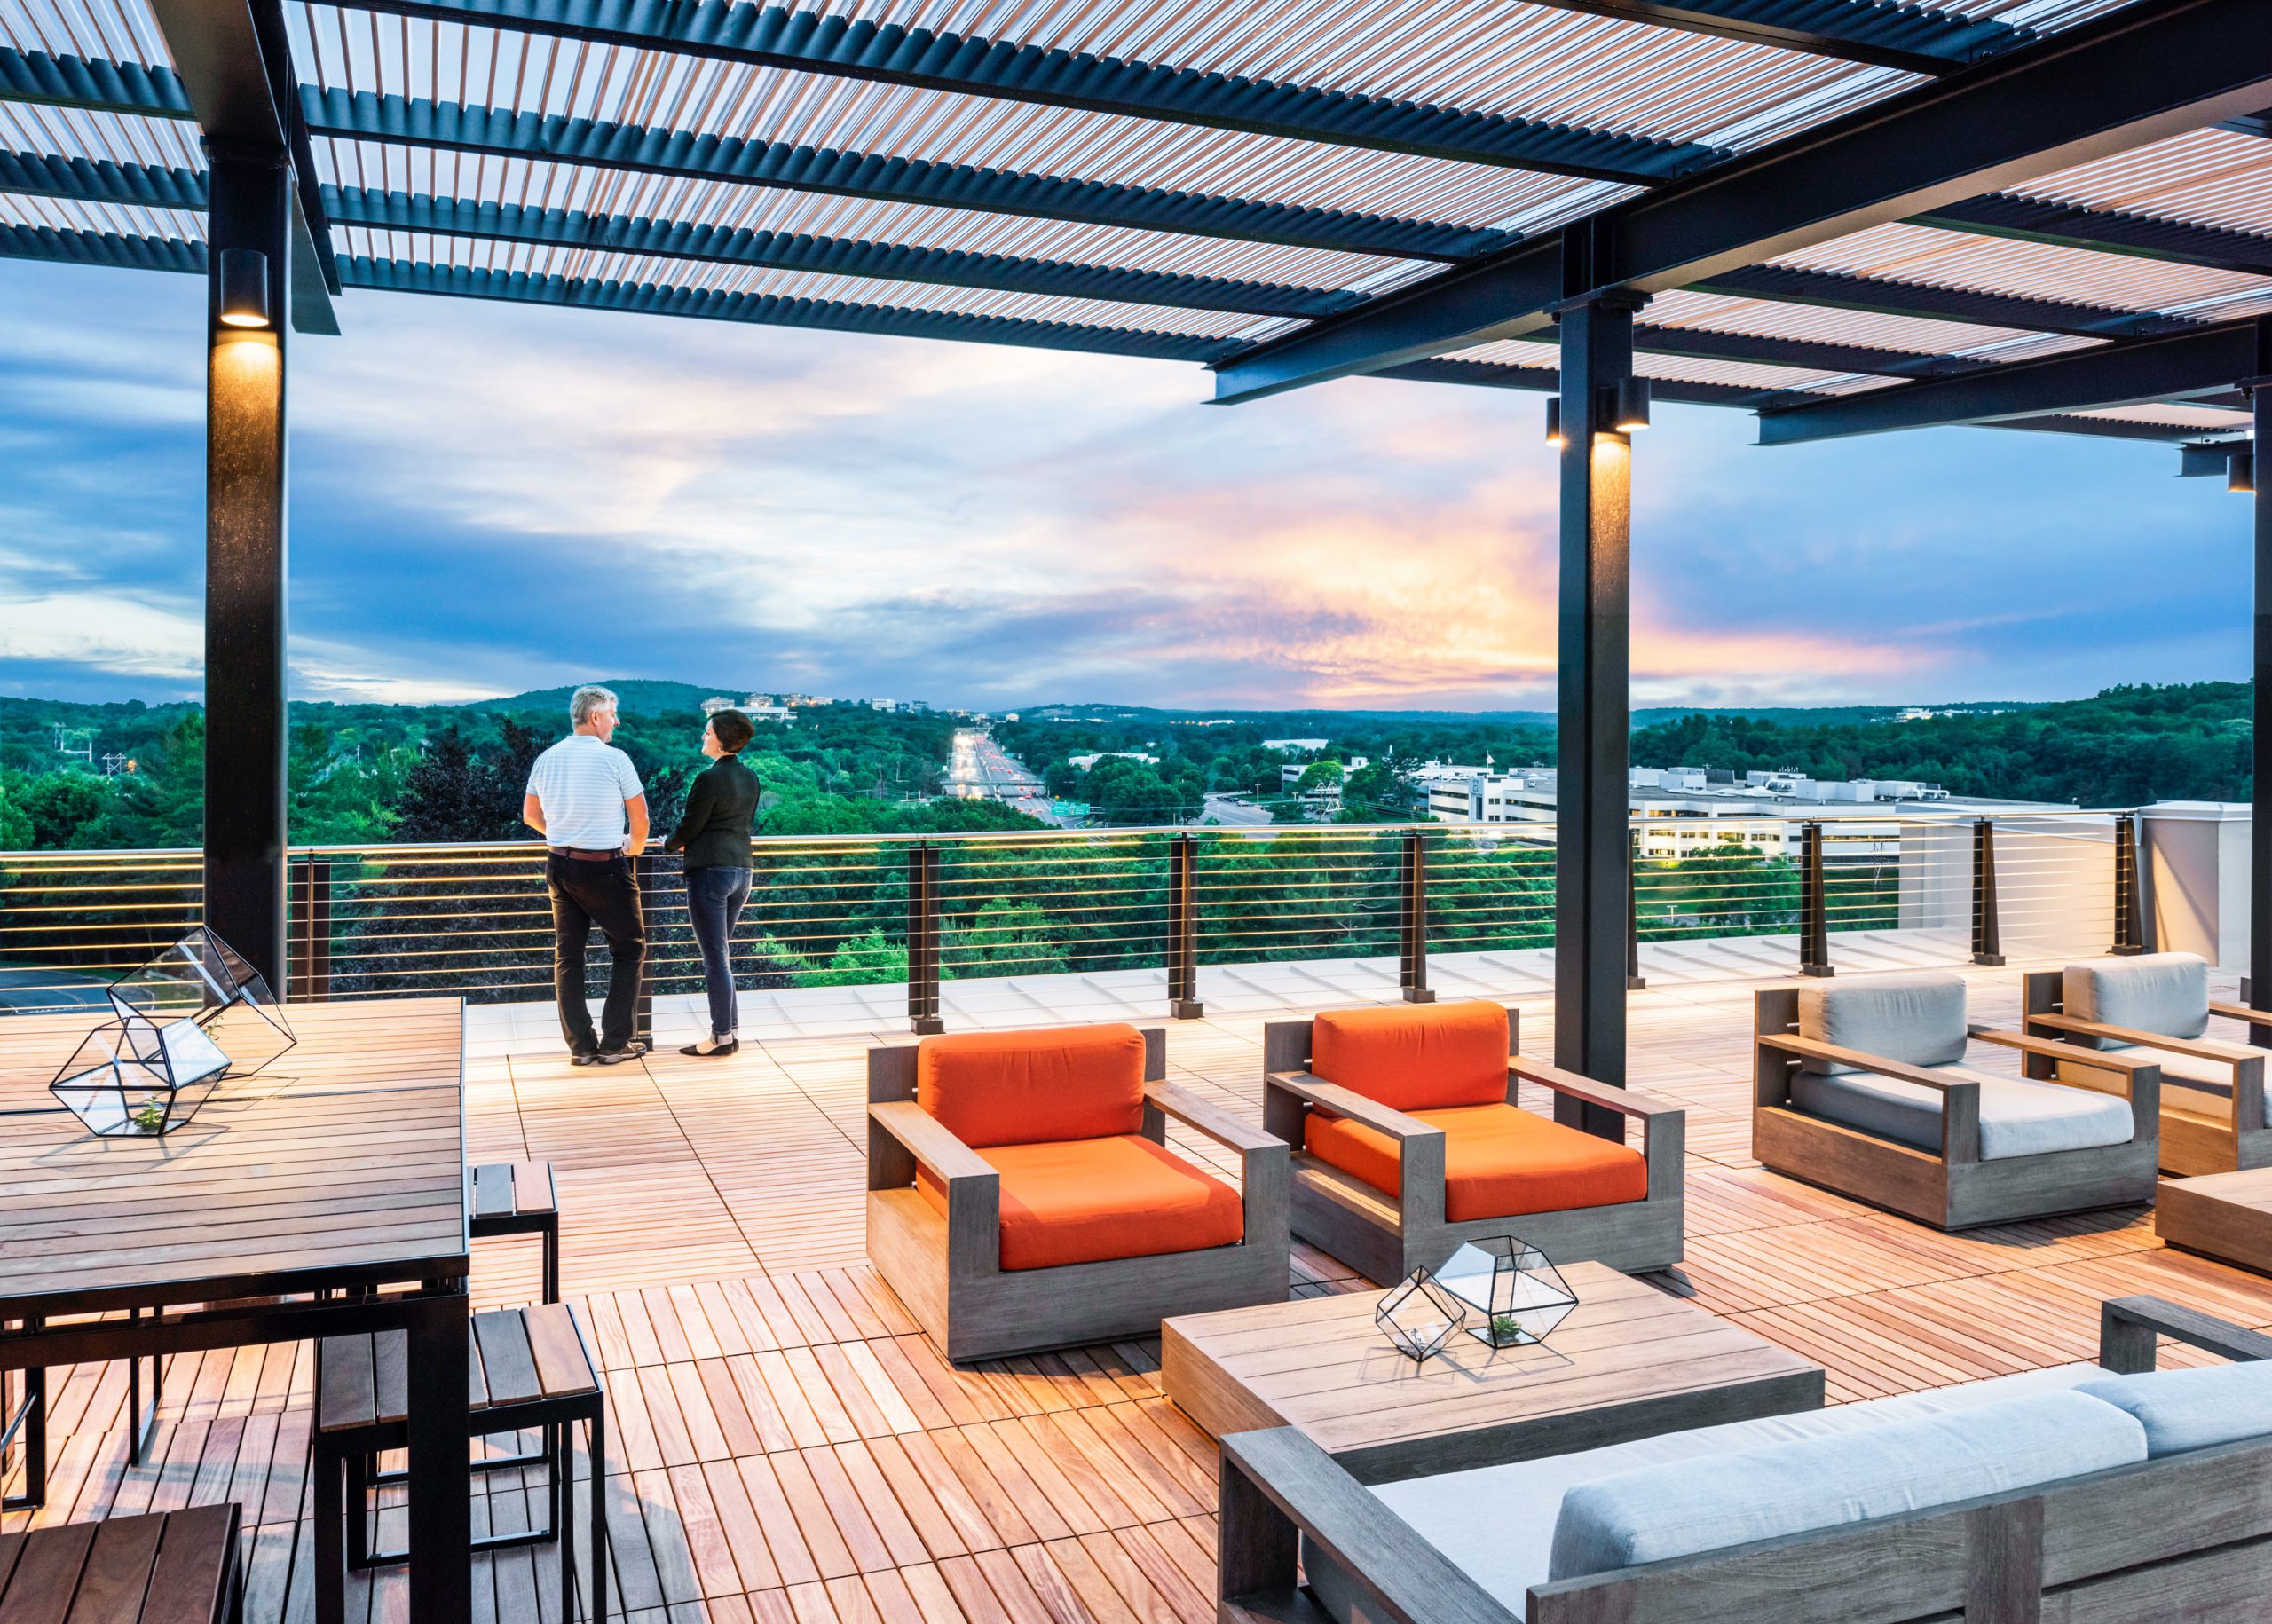 Rooftop space at sunset.